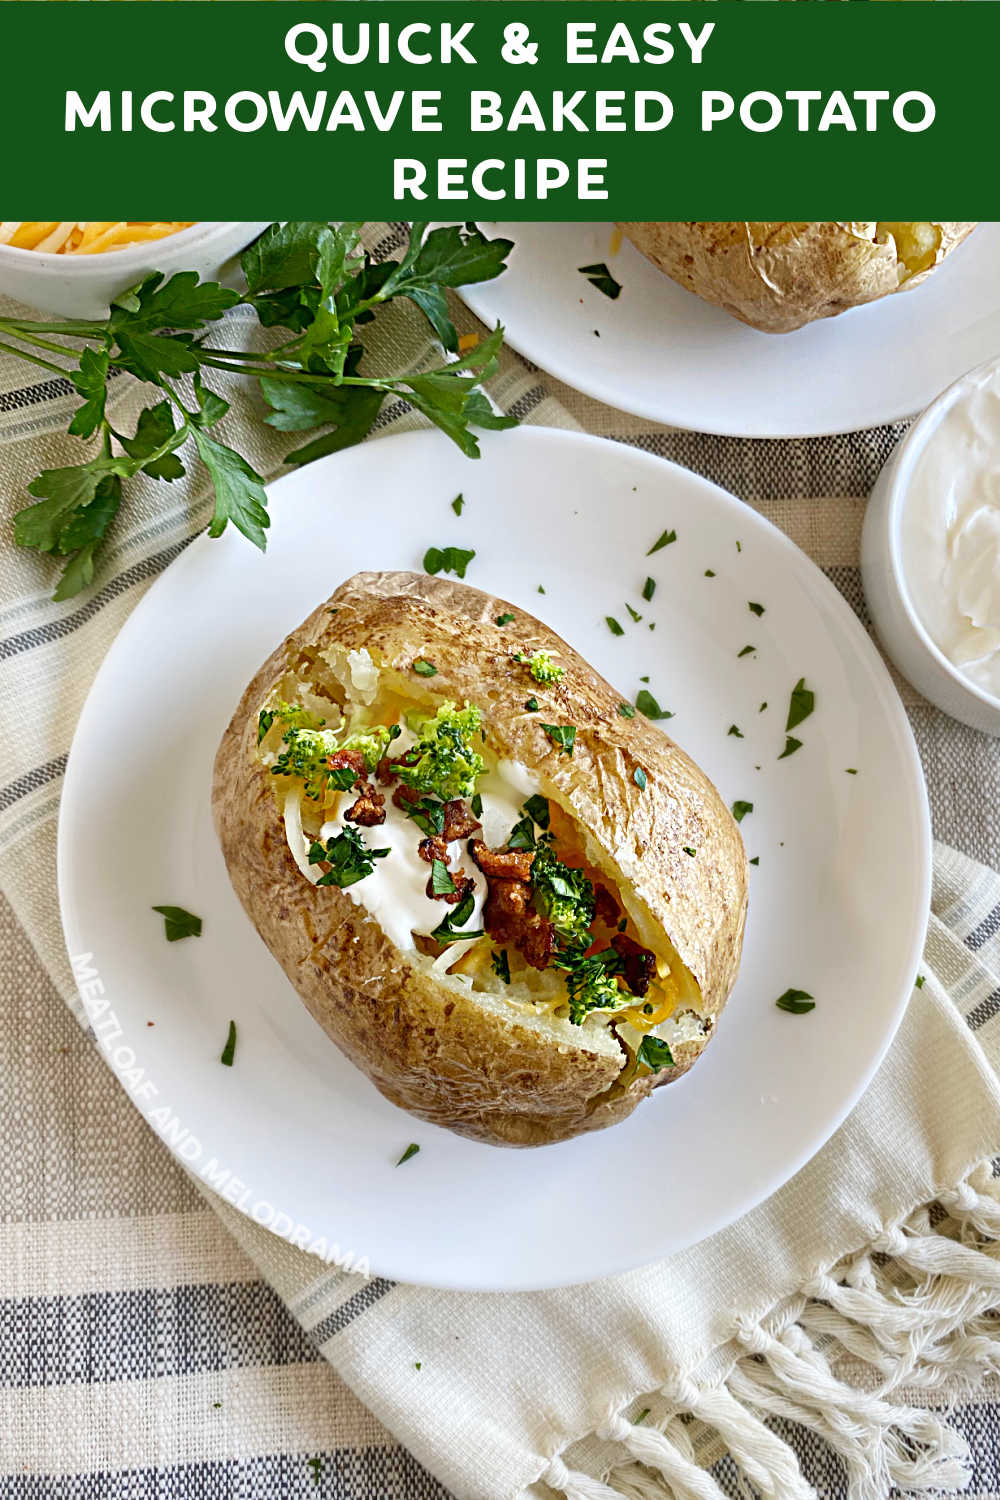 This Easy Microwave Baked Potato recipe makes soft, fluffy potatoes with crispy skins in minutes. Perfect for loaded baked potatoes or a quick side dish when you don't have time to bake or air fry your spuds! via @meamel